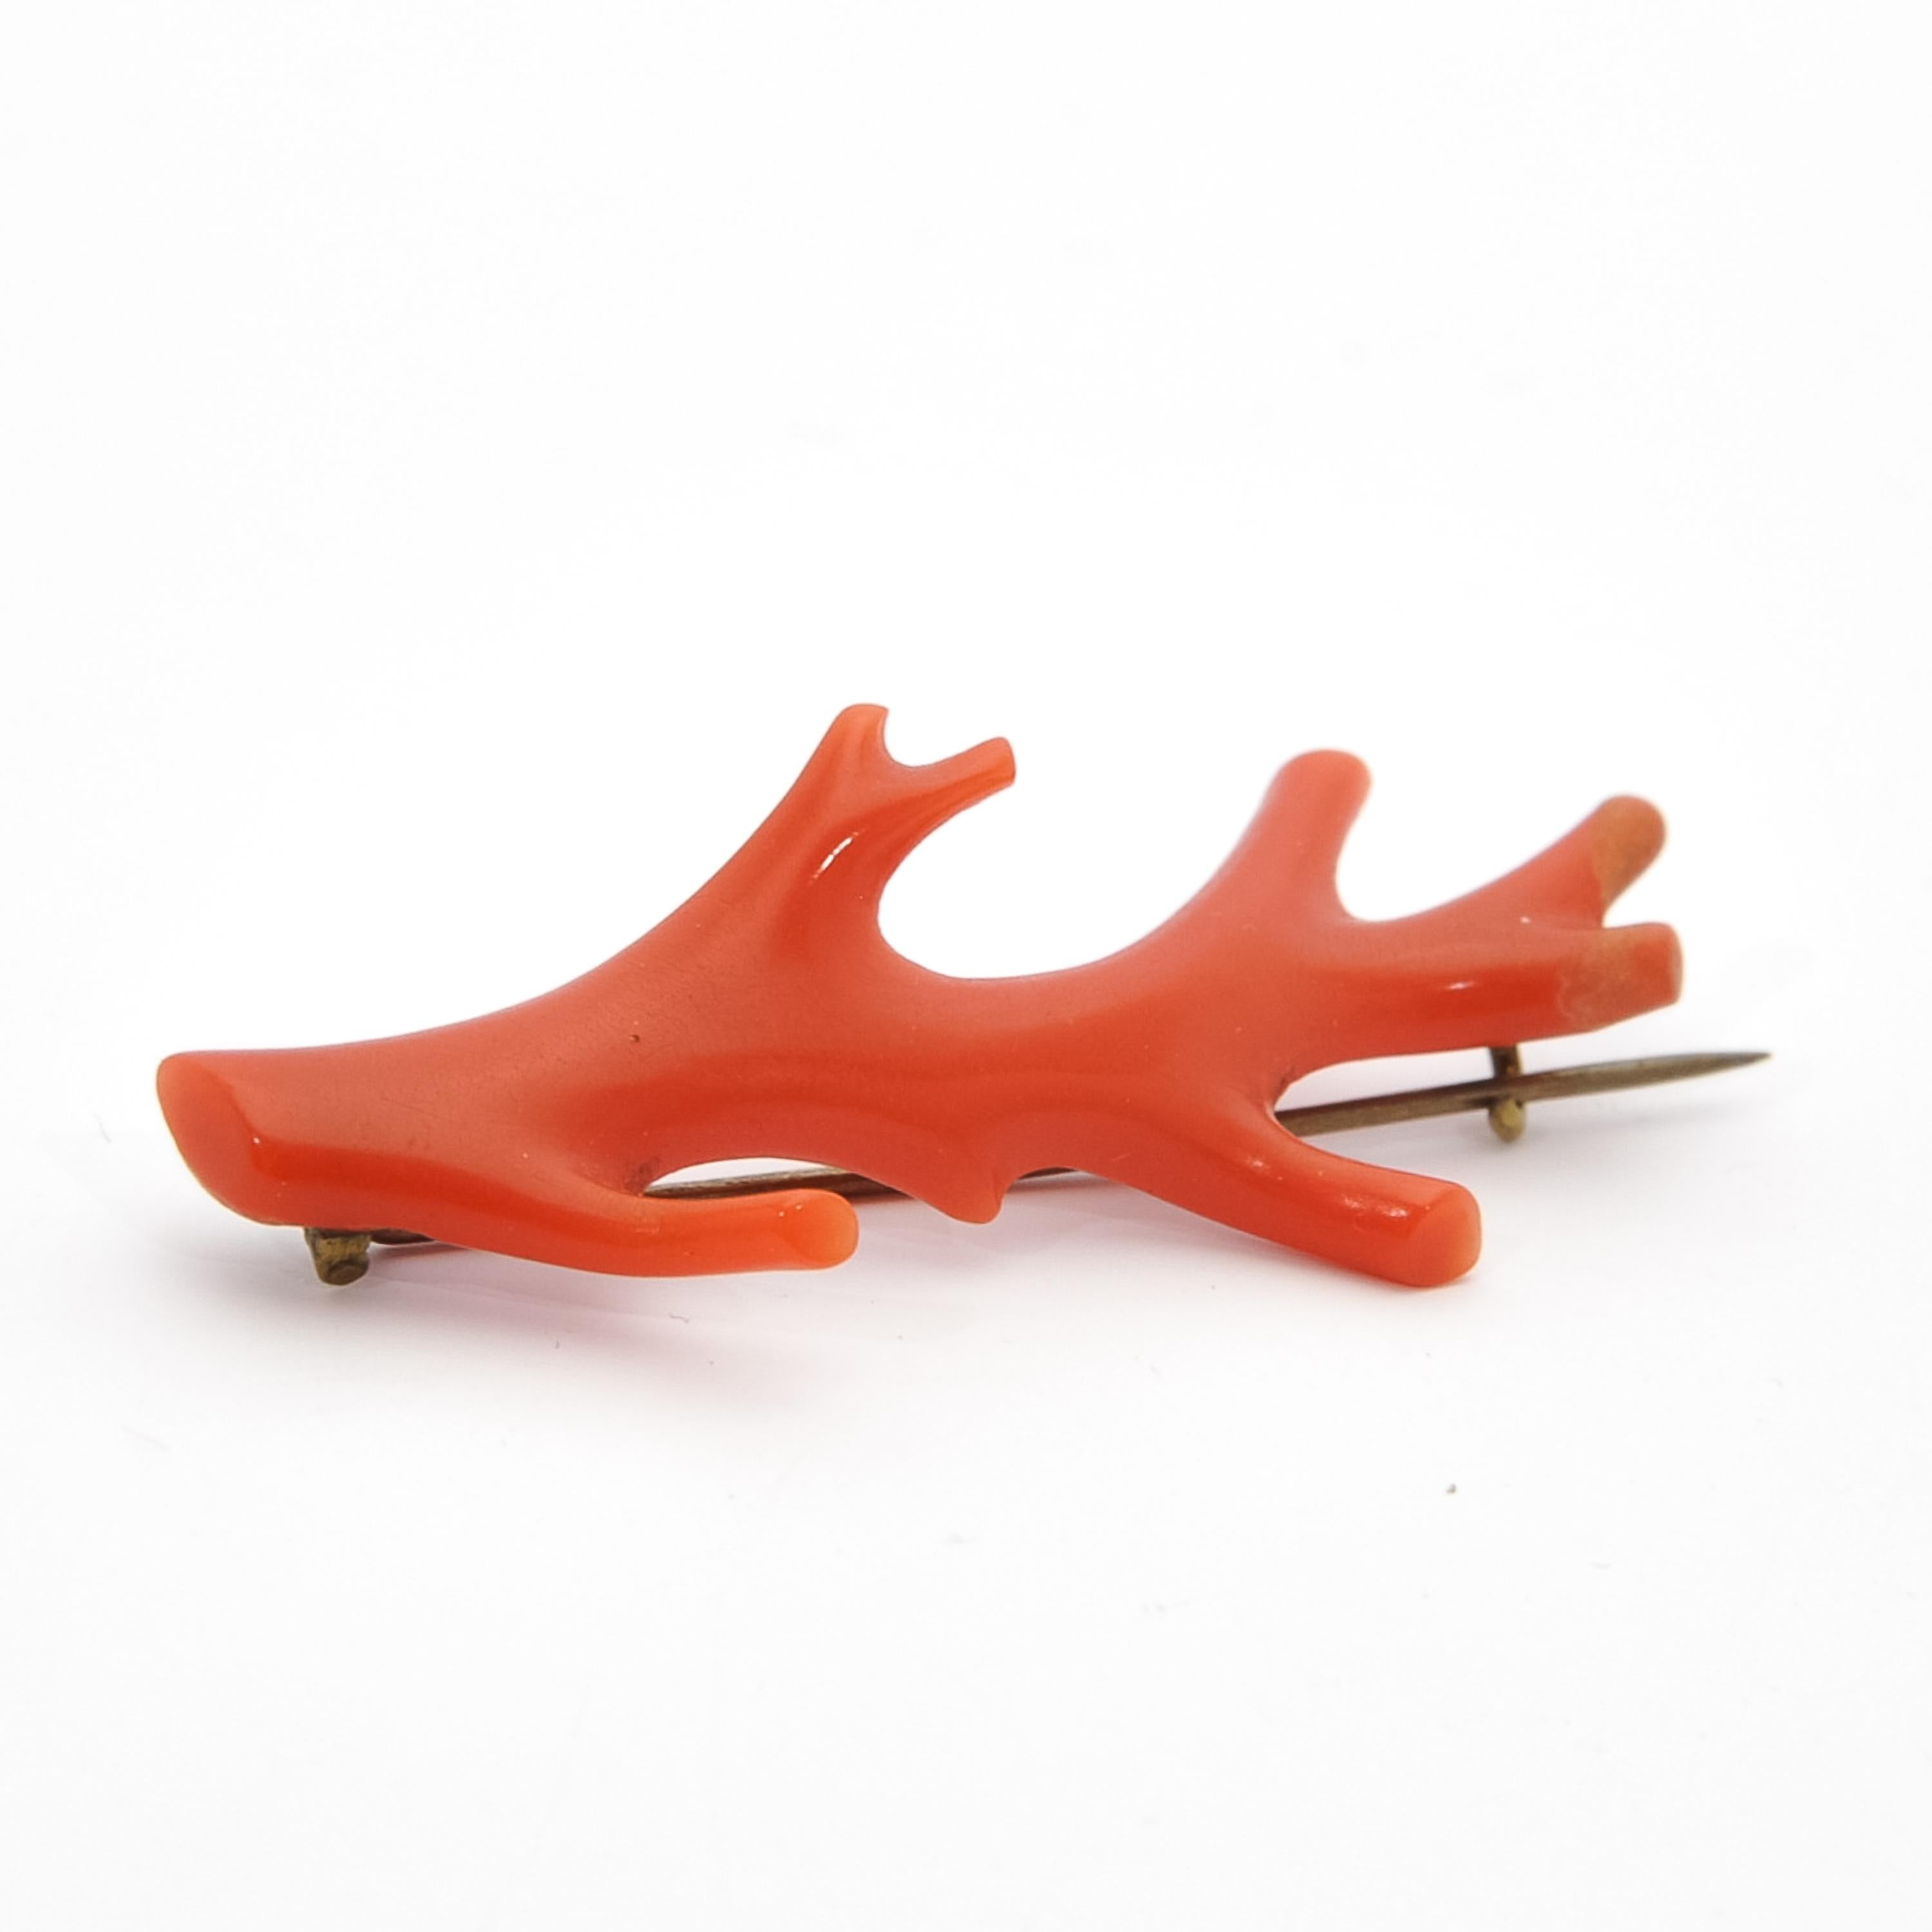 This lovely red coral branch brooch features a gorgeous deep red in color coral. The brooch closes with a metal base rolling c clasp. This brooch is simply delightful! It would make a wonderful addition to a fine vintage jewelry collection and a